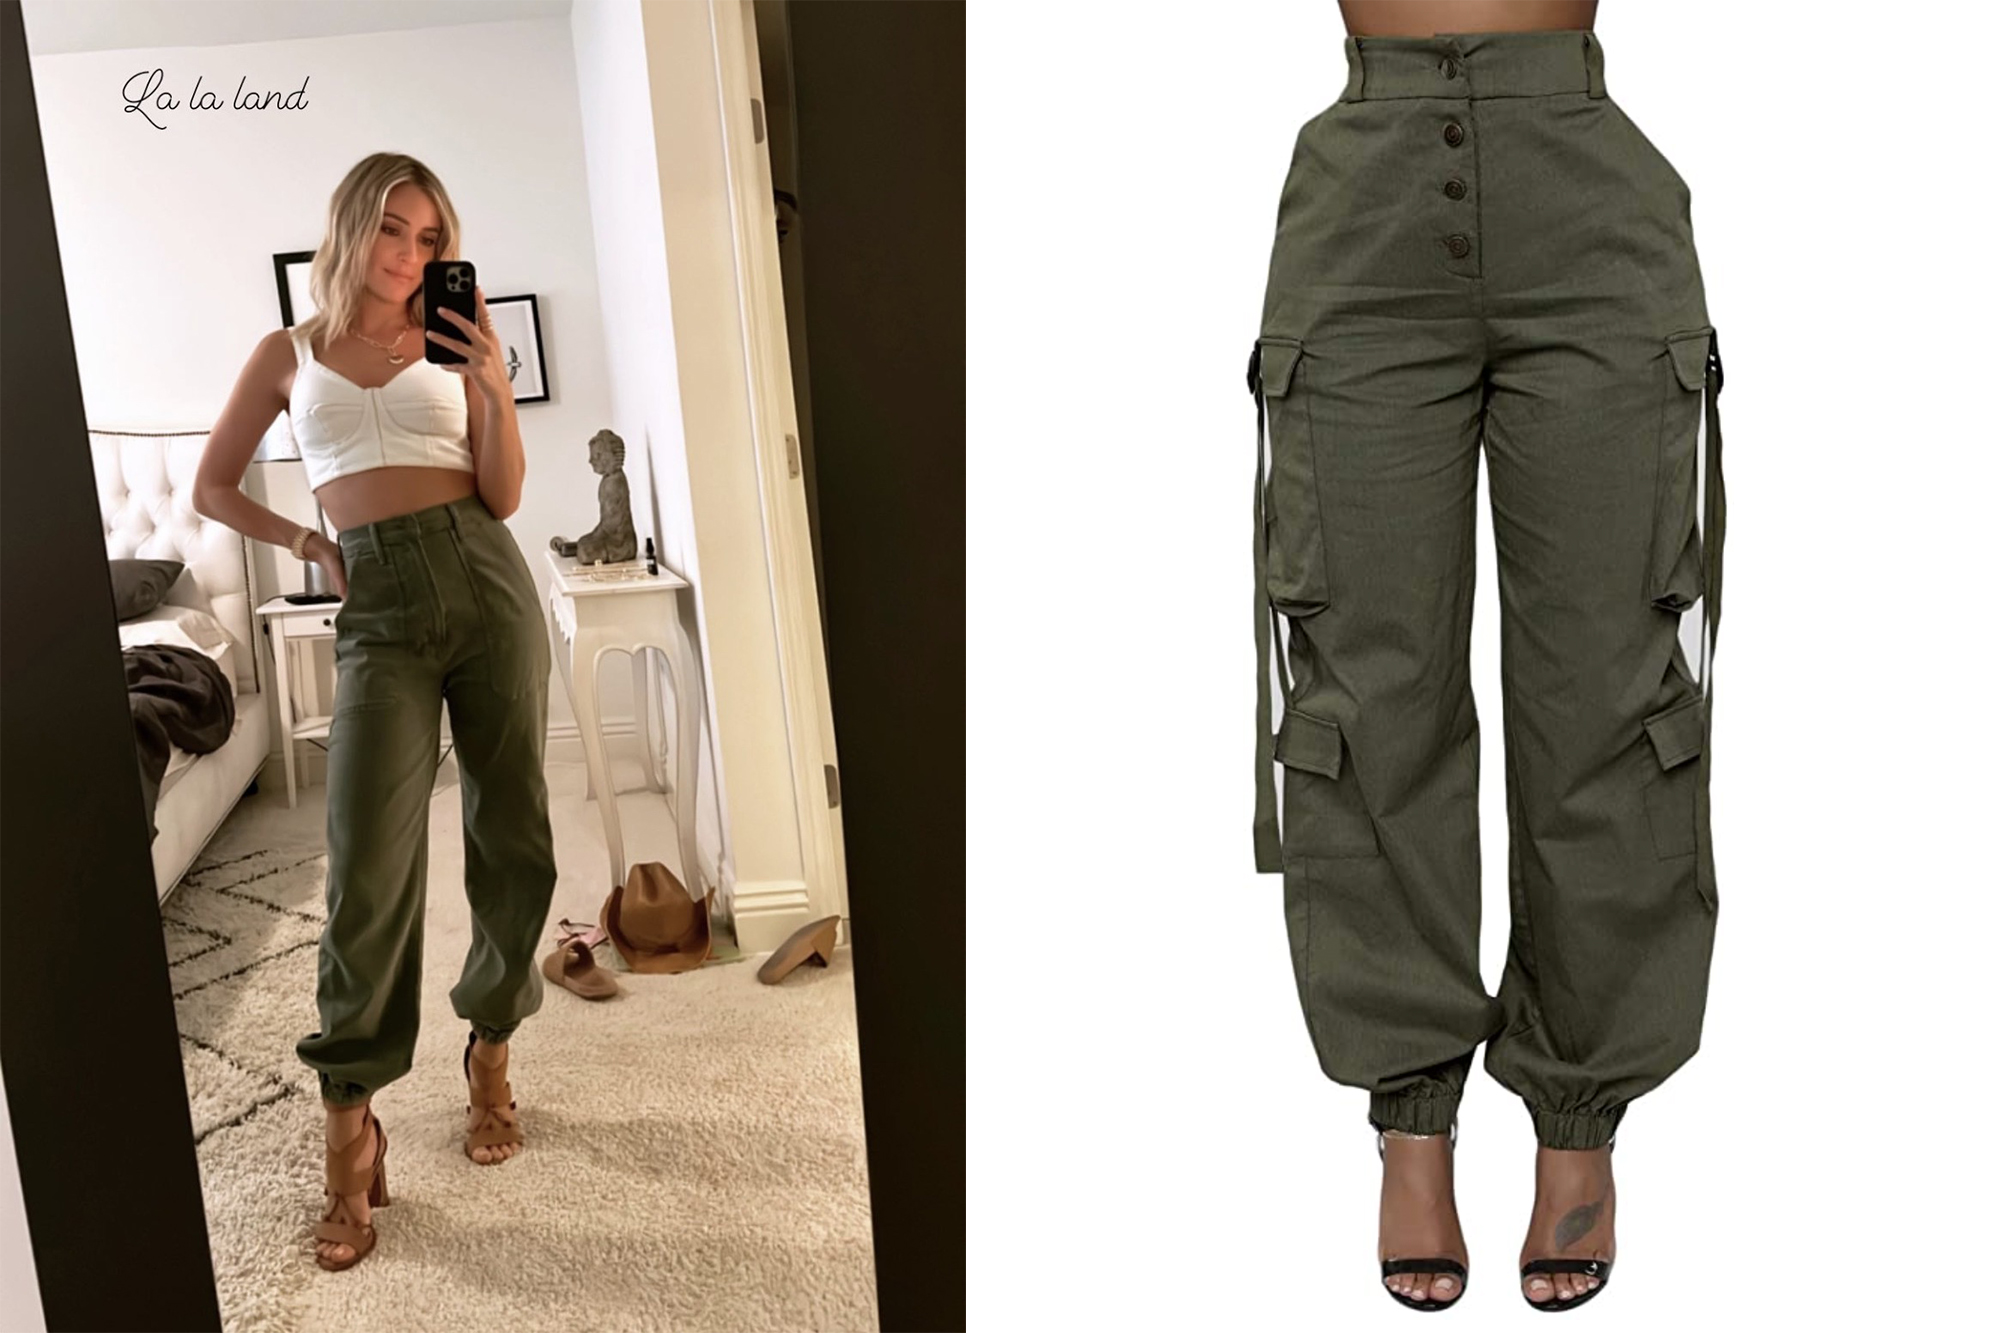 Midsize cargo pant outfit inspo, Gallery posted by choosingchelsea